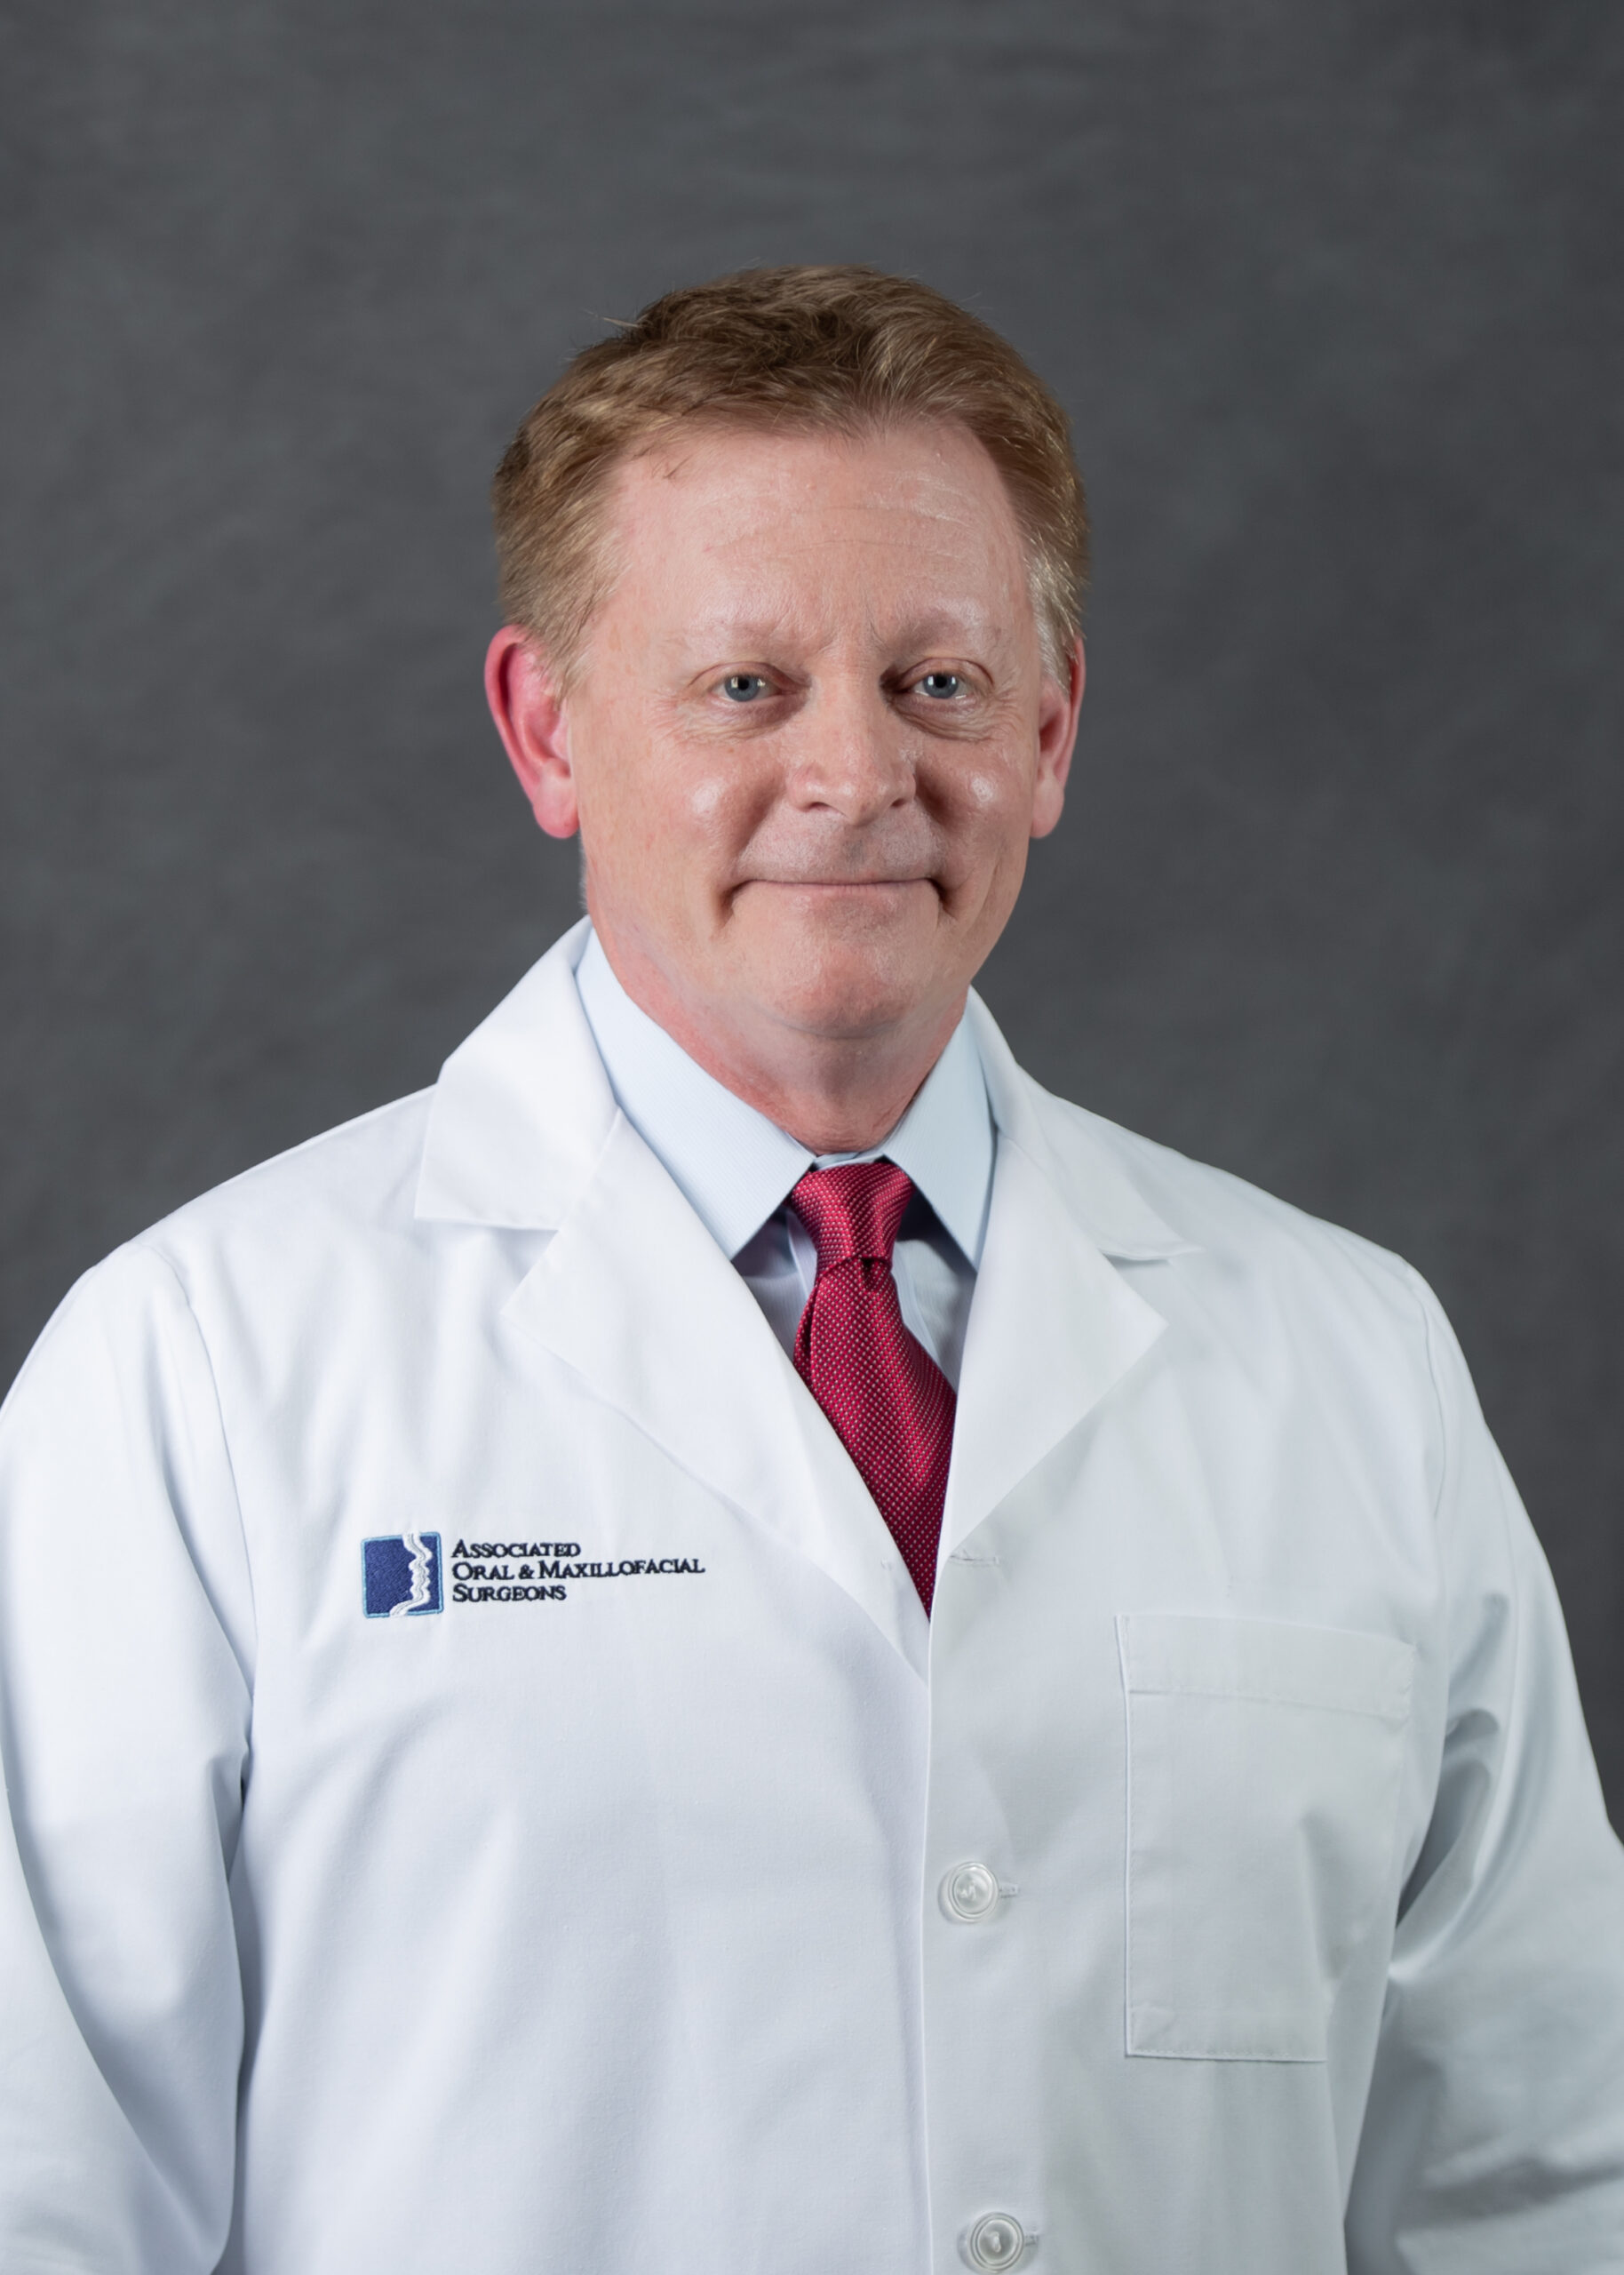 Dr Larry Otte an oral surgeon at Associated Oral and Maxillofacial Surgeons